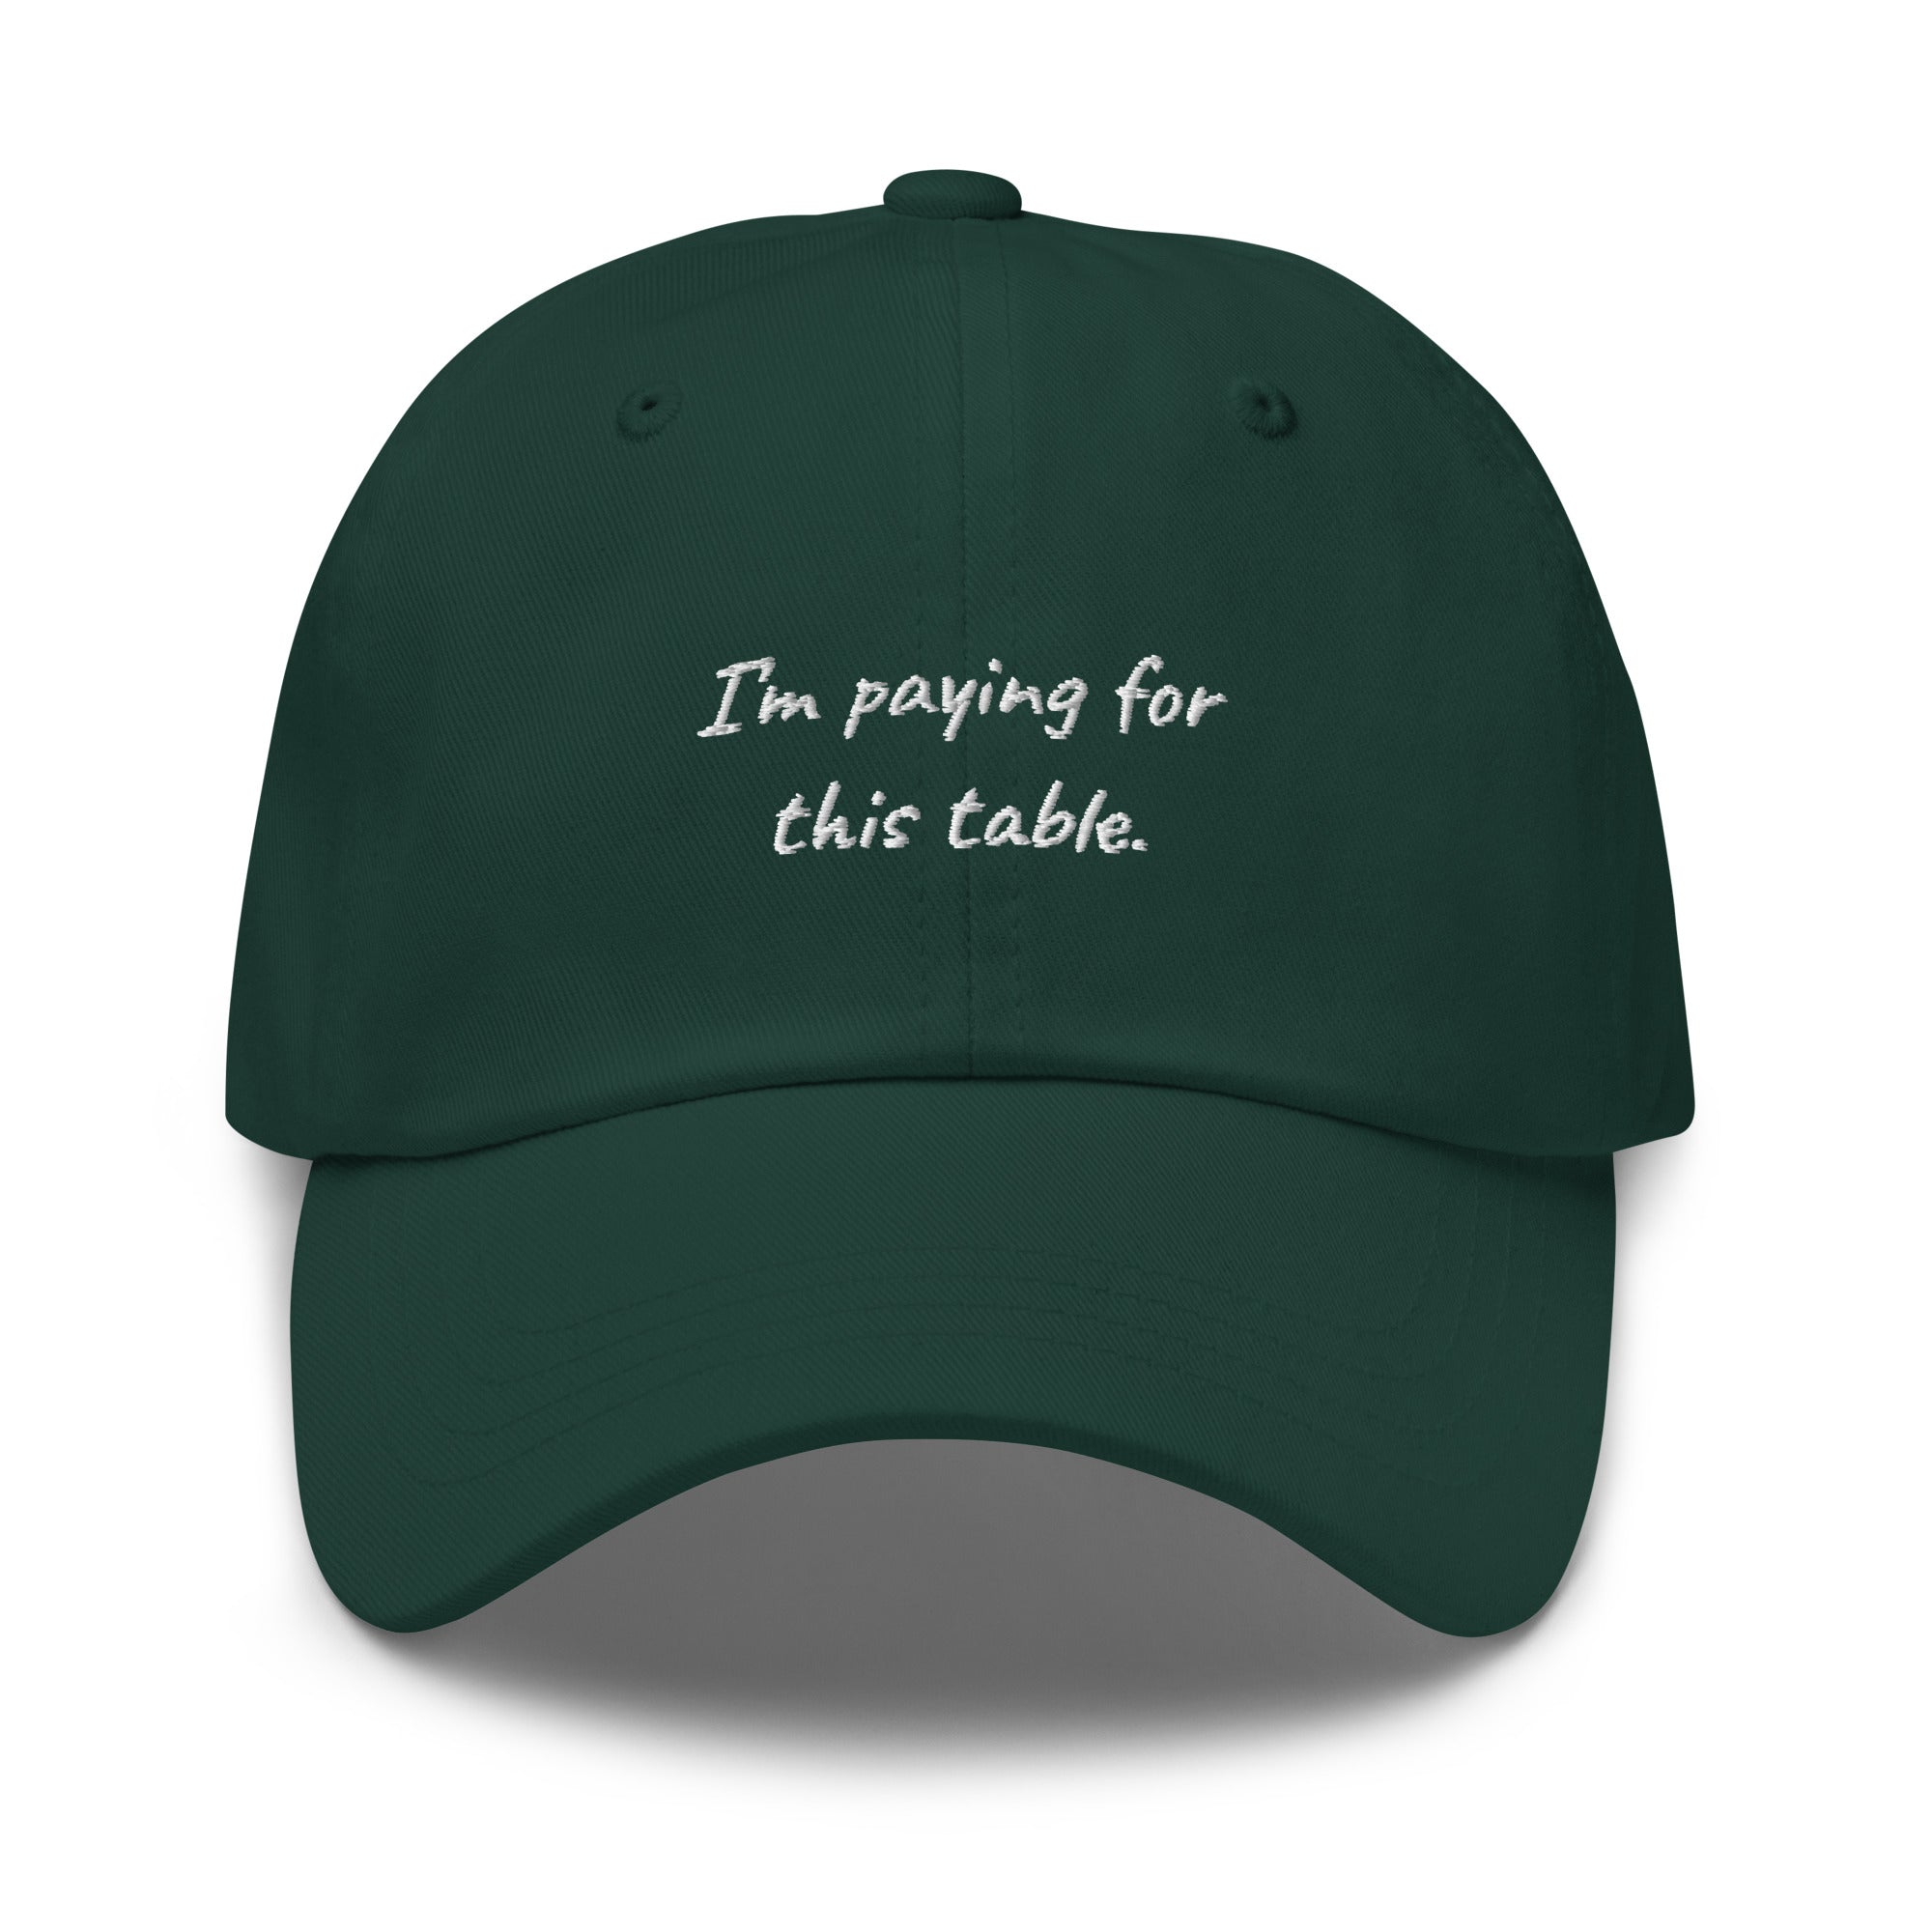 I'm paying for this table - Dad hat